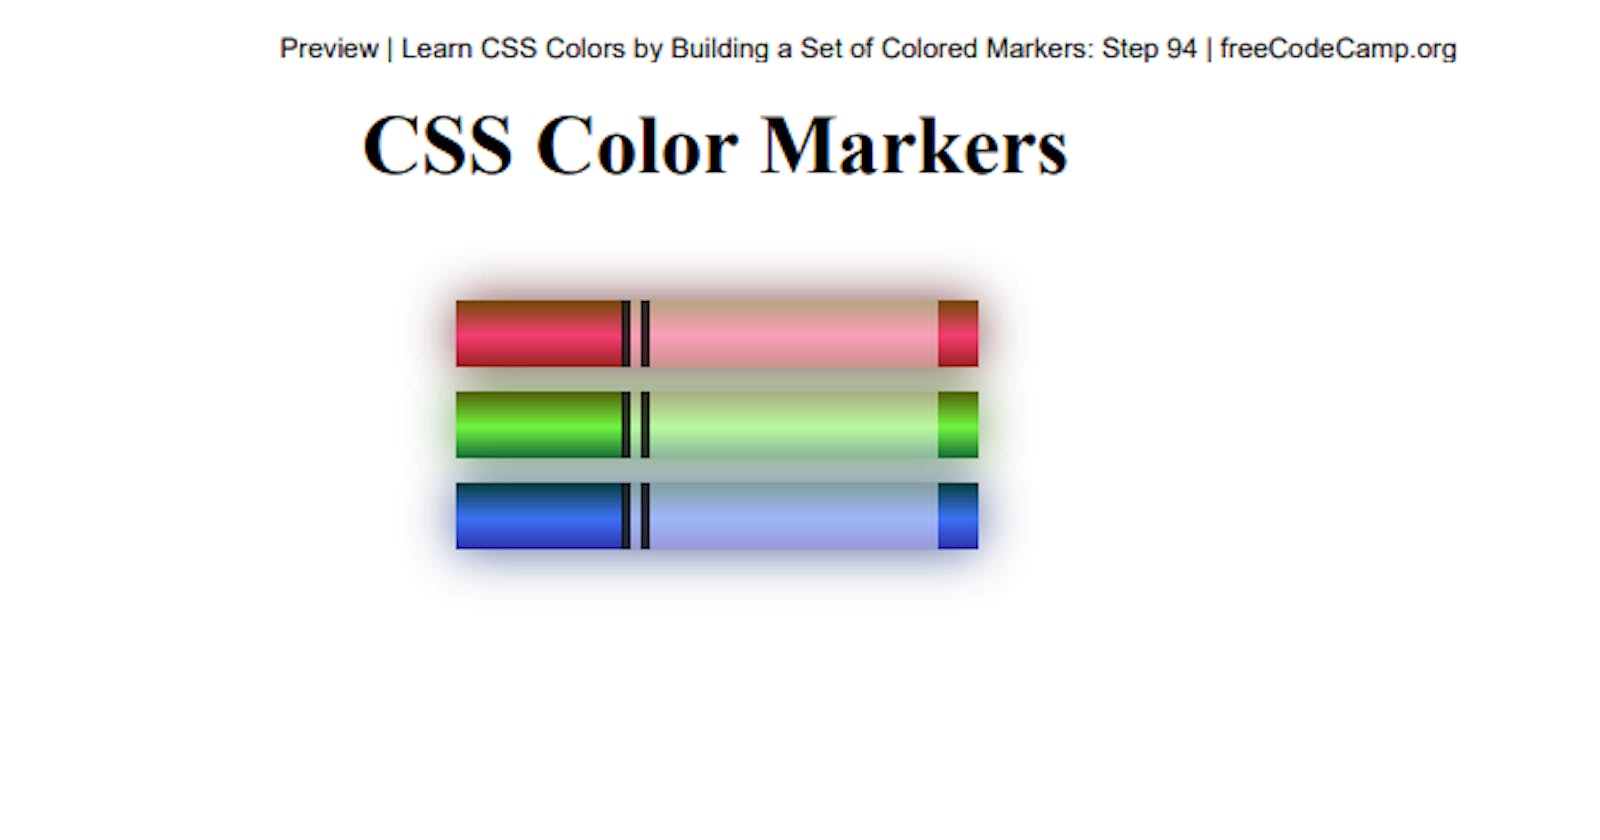 Tools to Learn CSS colors by Building a set of colored markers